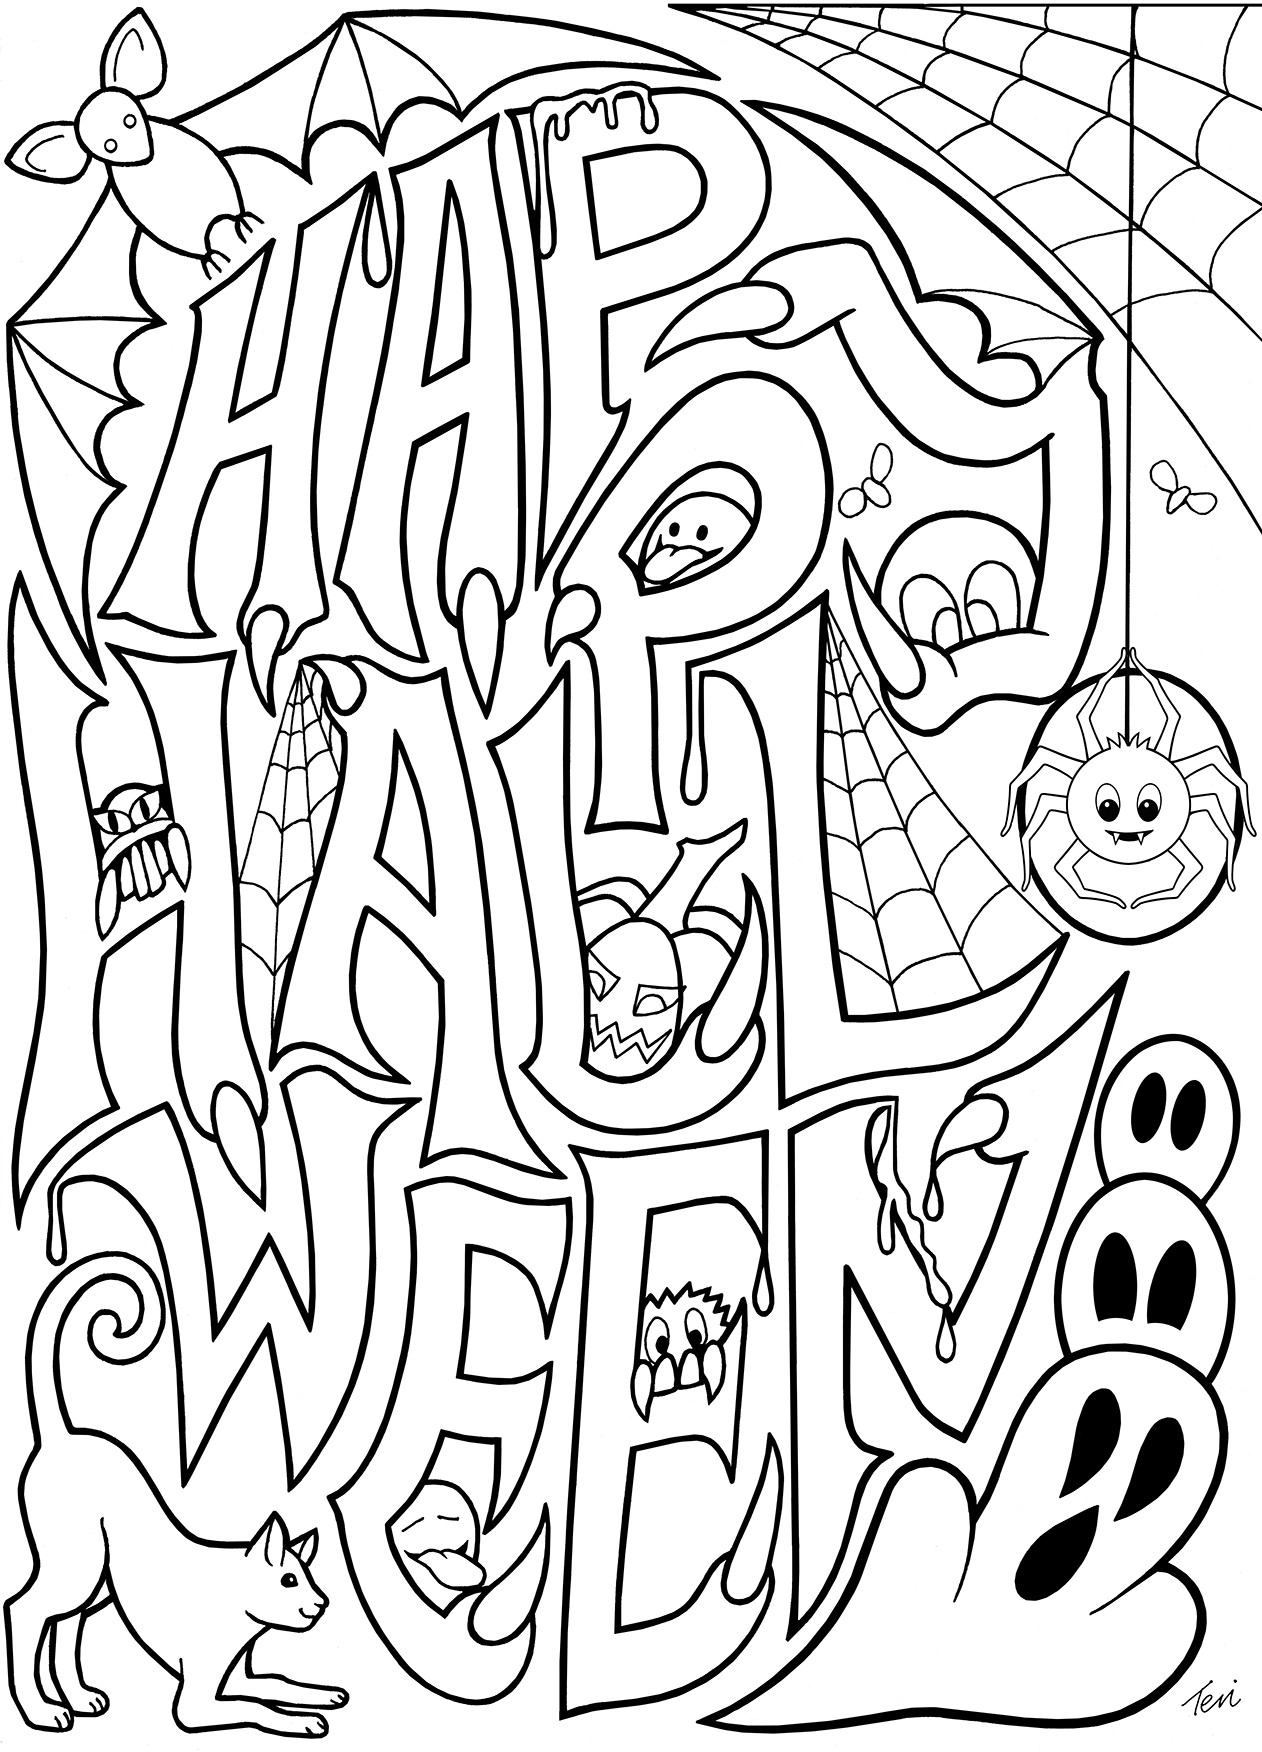 Printable Halloween Coloring Pages For Kids
 Free Adult Coloring Book Pages Happy Halloween by Blue